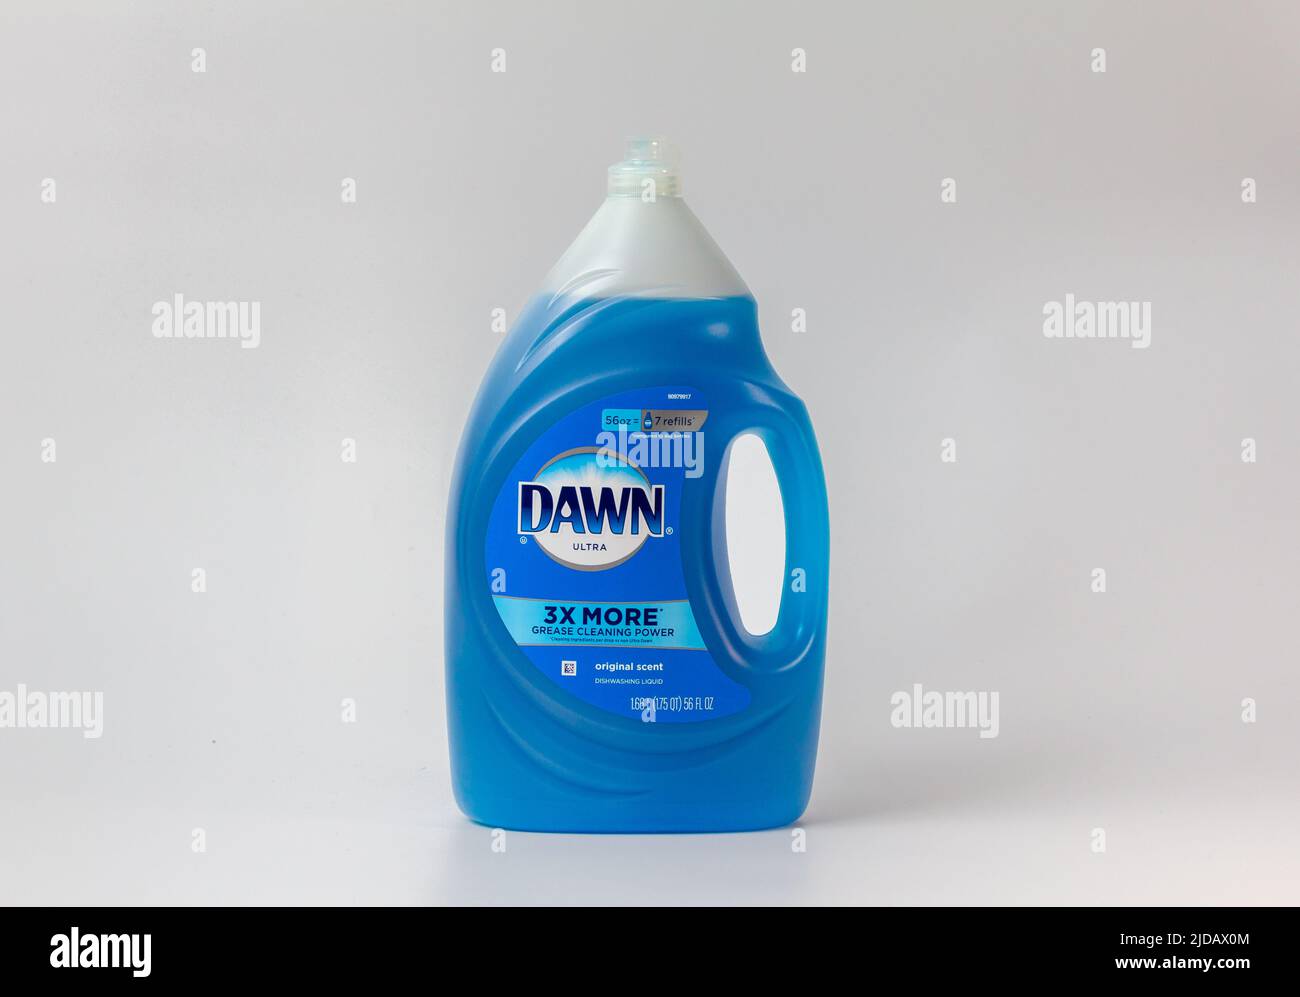 Dish Soap Containers Dishwashing Liquid Detergent White Blank